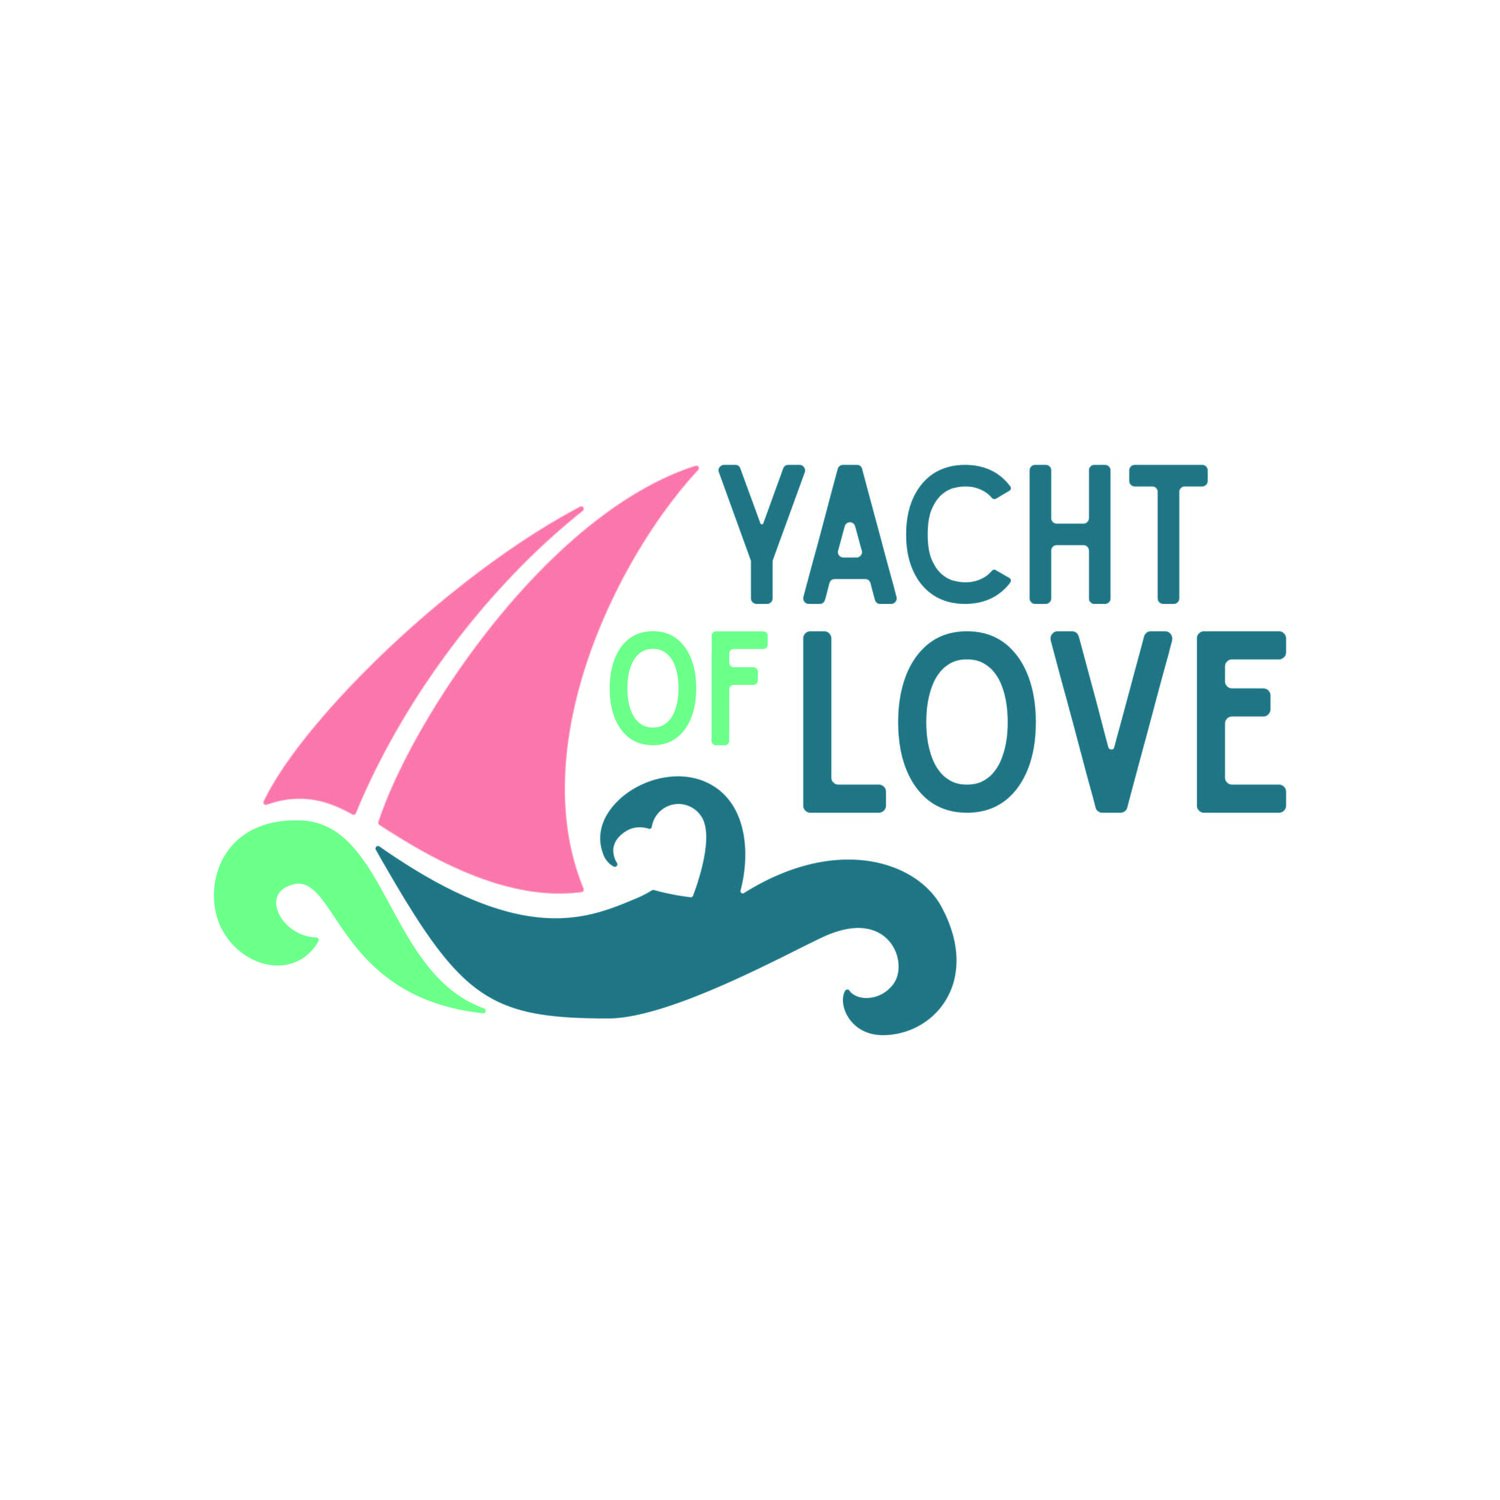 A Yacht of Love